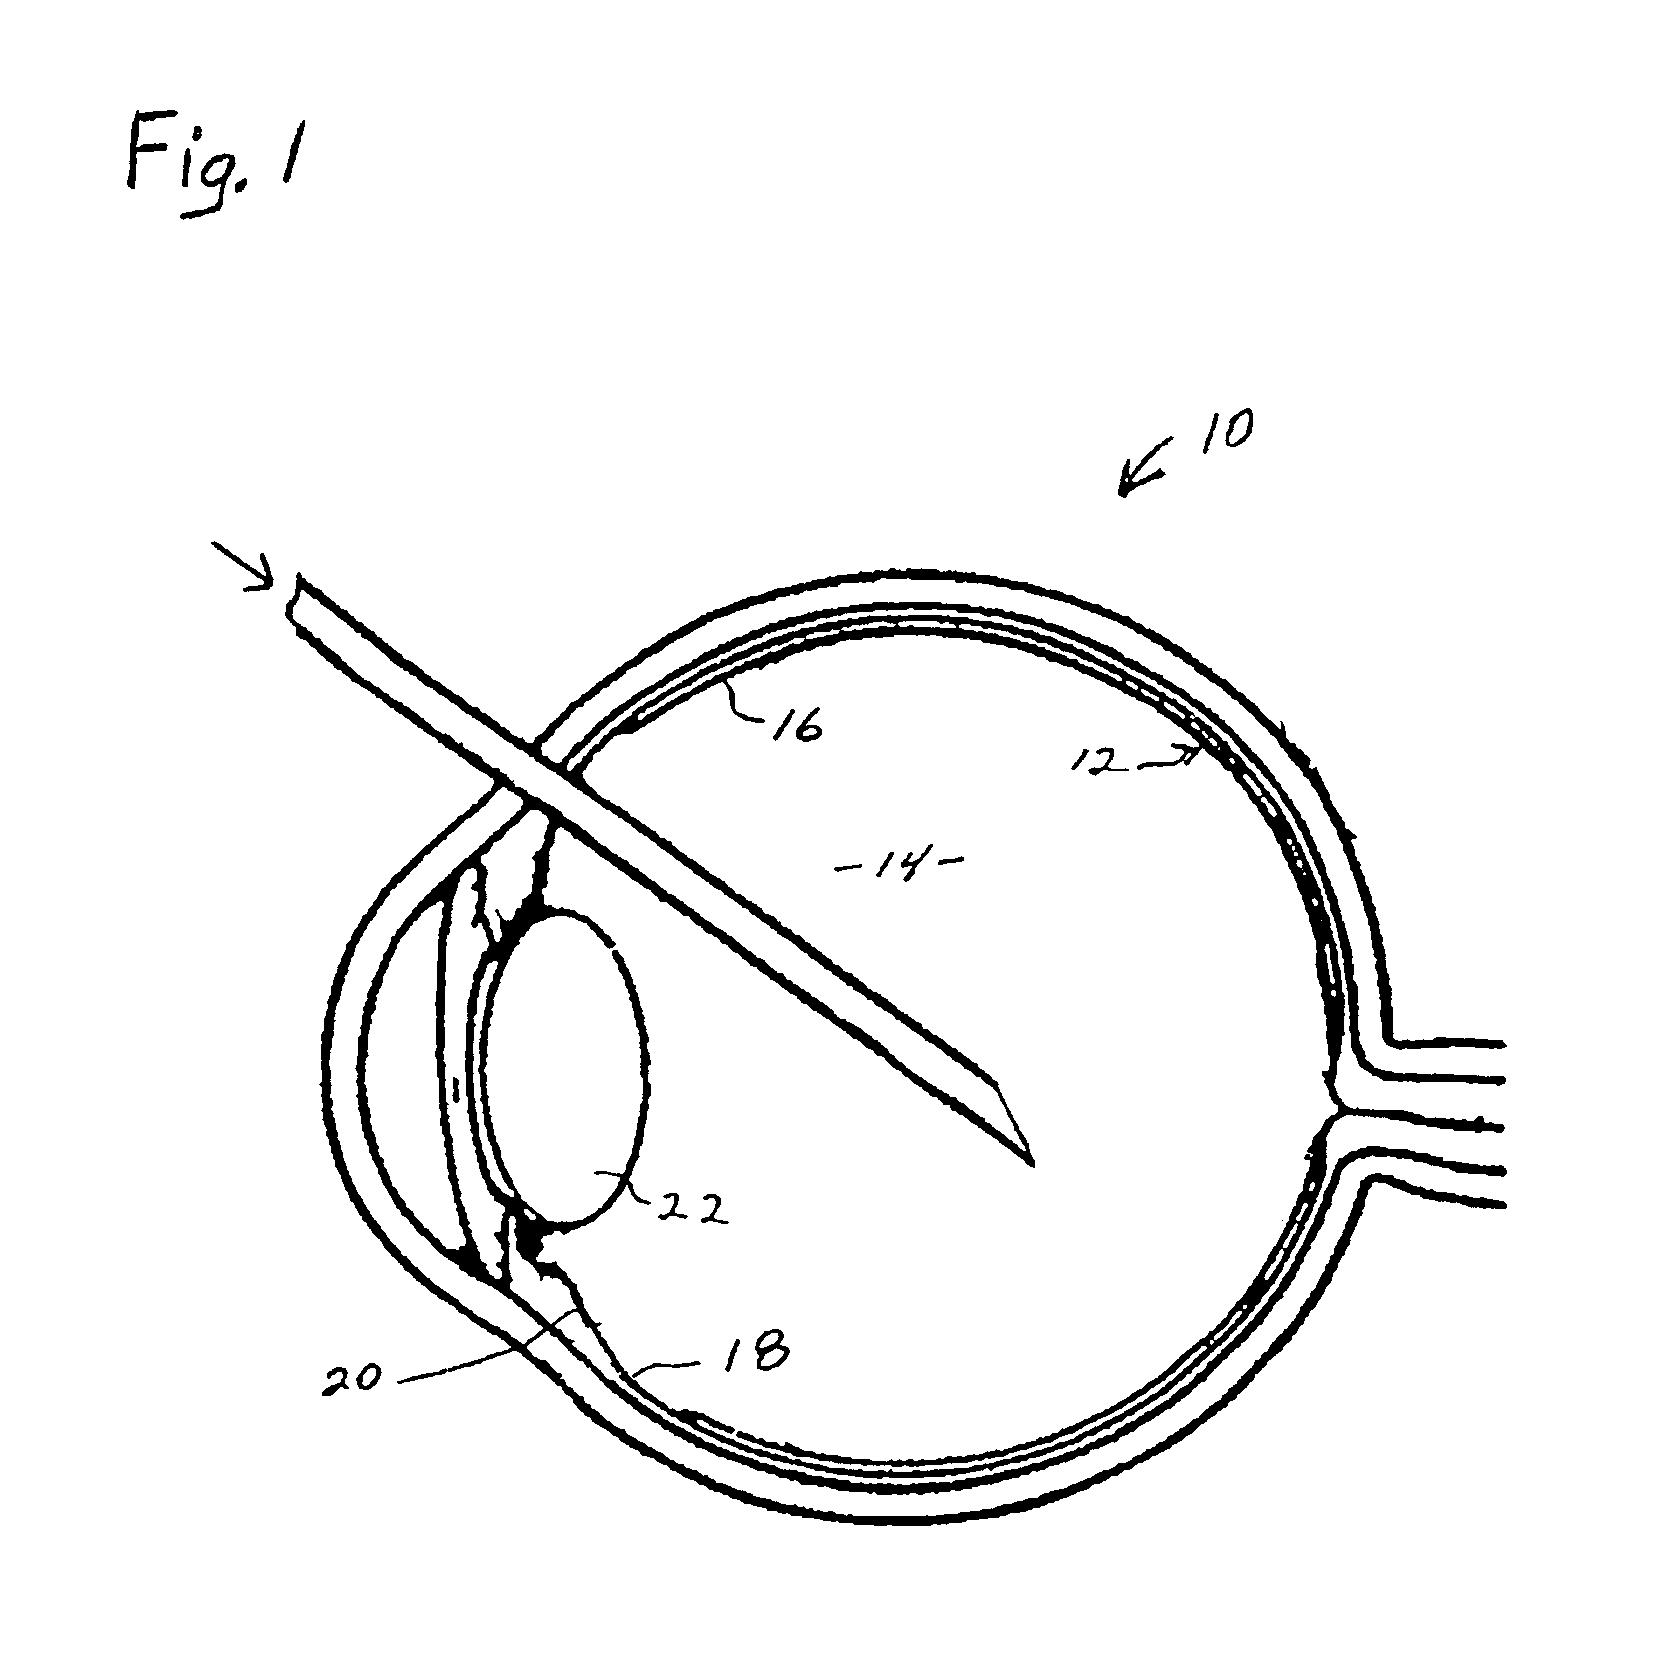 Process for generating plasmin in the vitreous of the eye and inducing separation of the posterior hyaloid from the retina